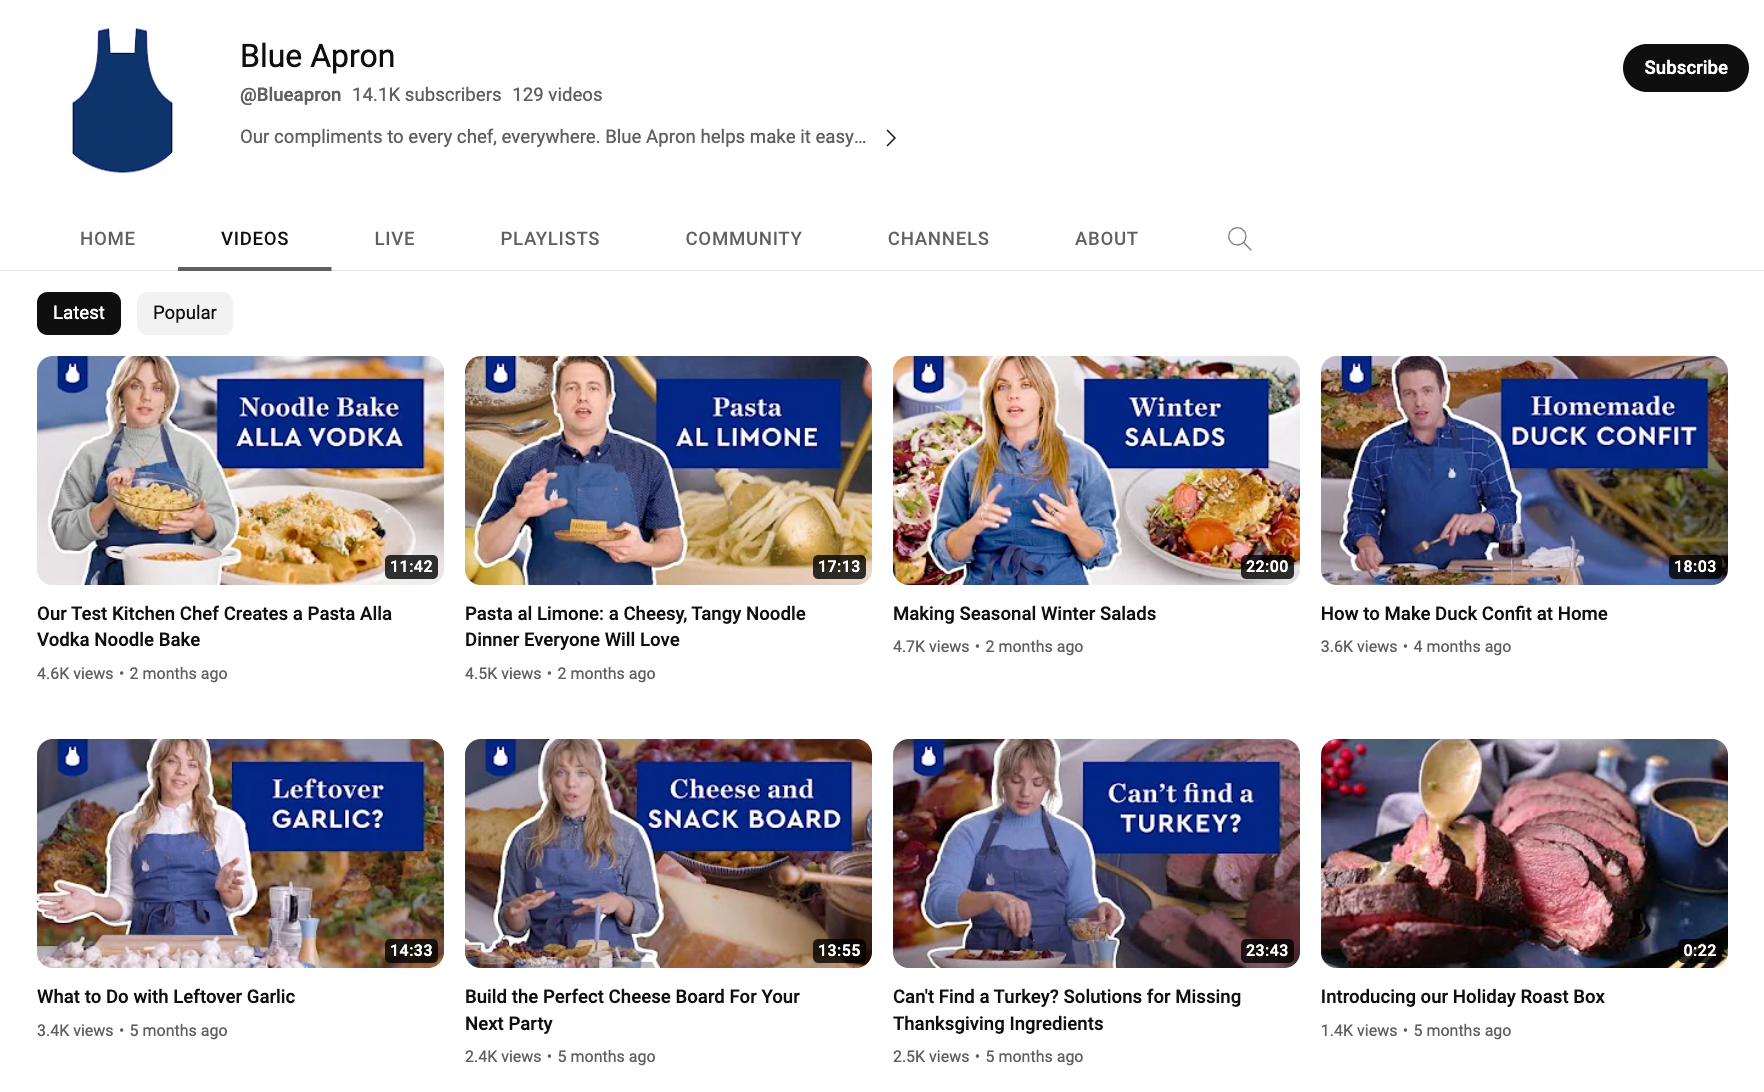 Screenshot of Blue Apron’s YouTube channel showing its latest videos.